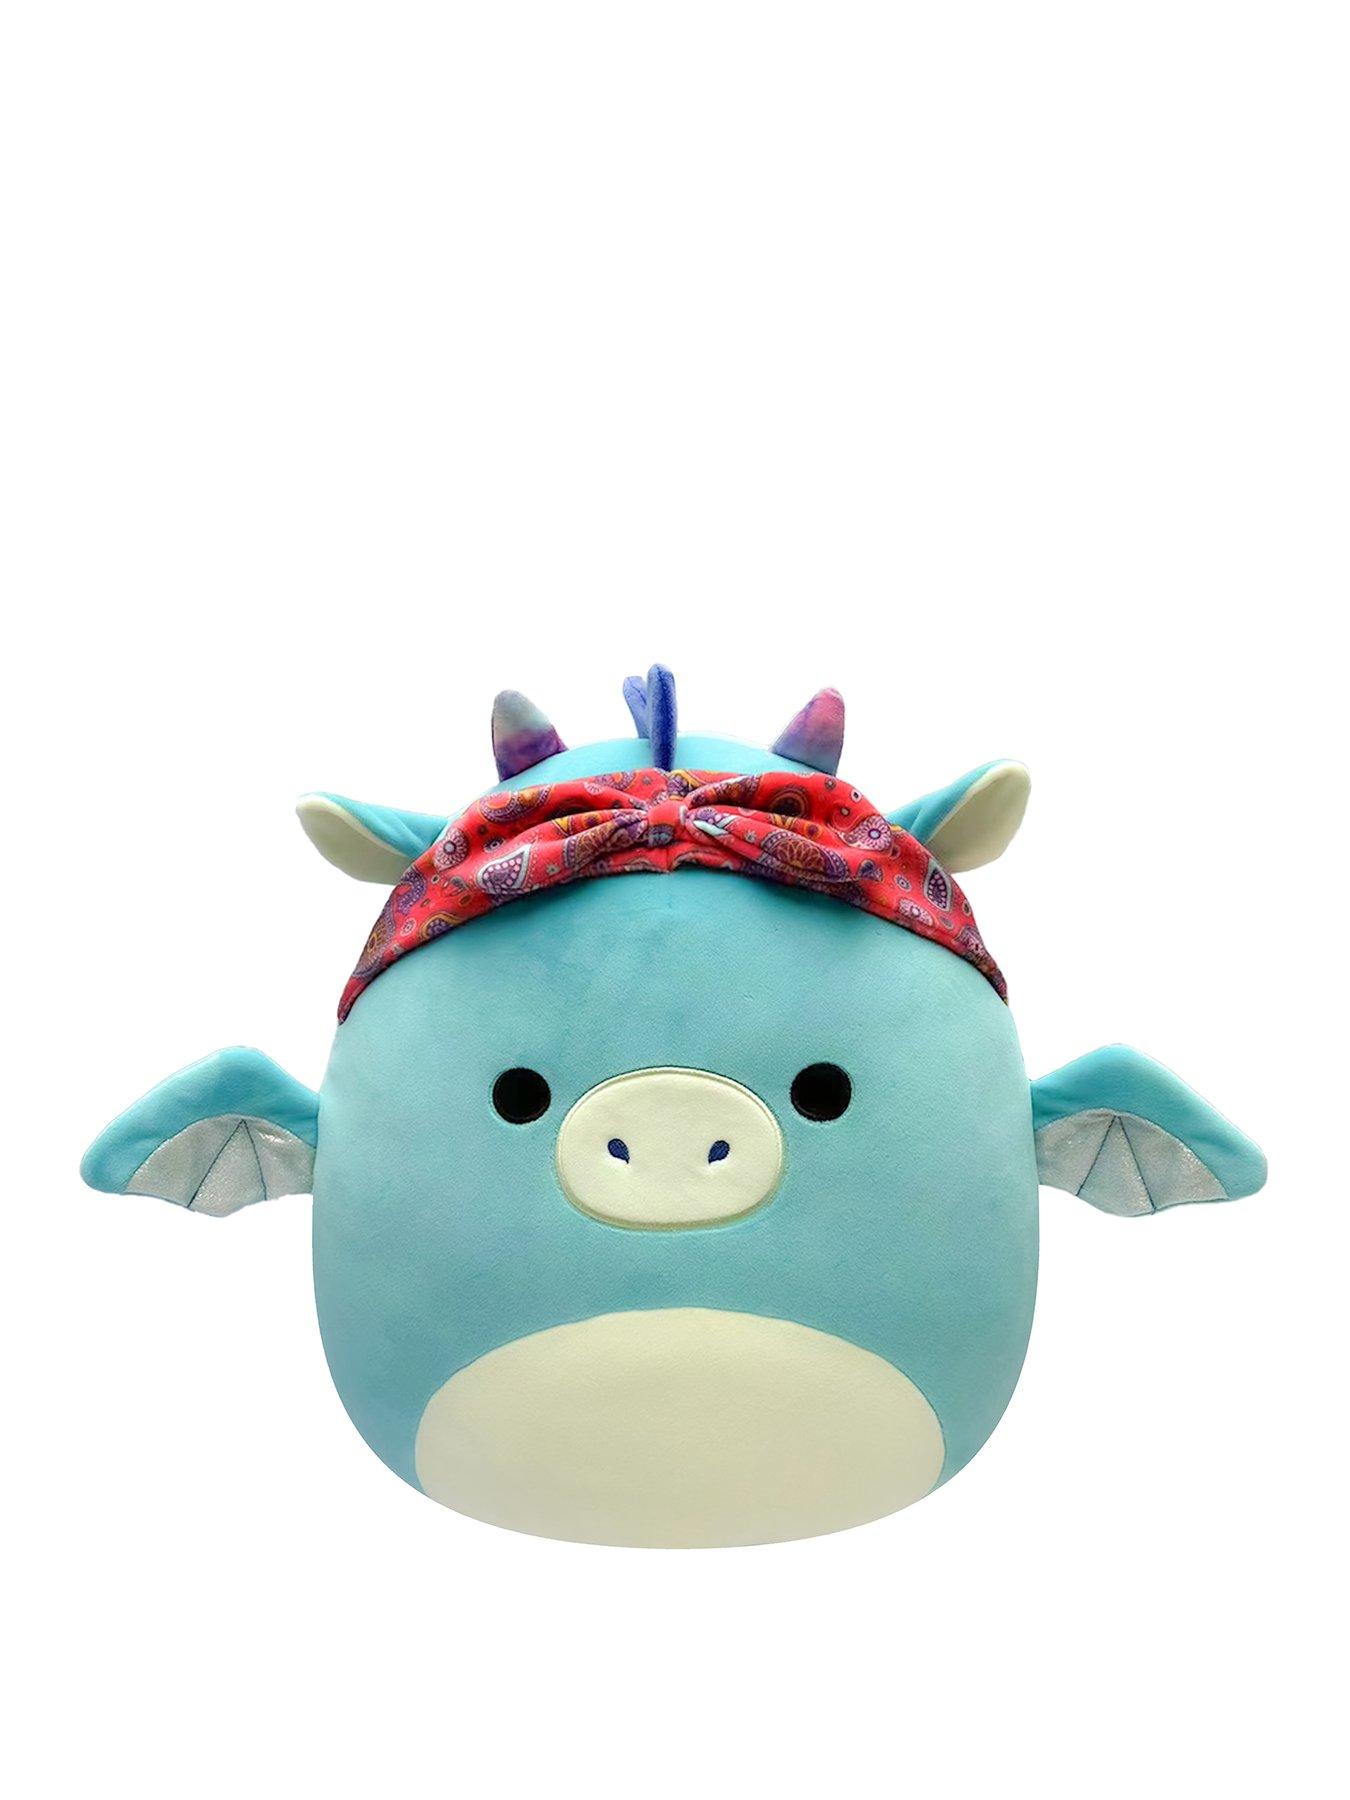 Squishmallow 12 Inch Bren the Green Bigfoot Limited Plush Toy